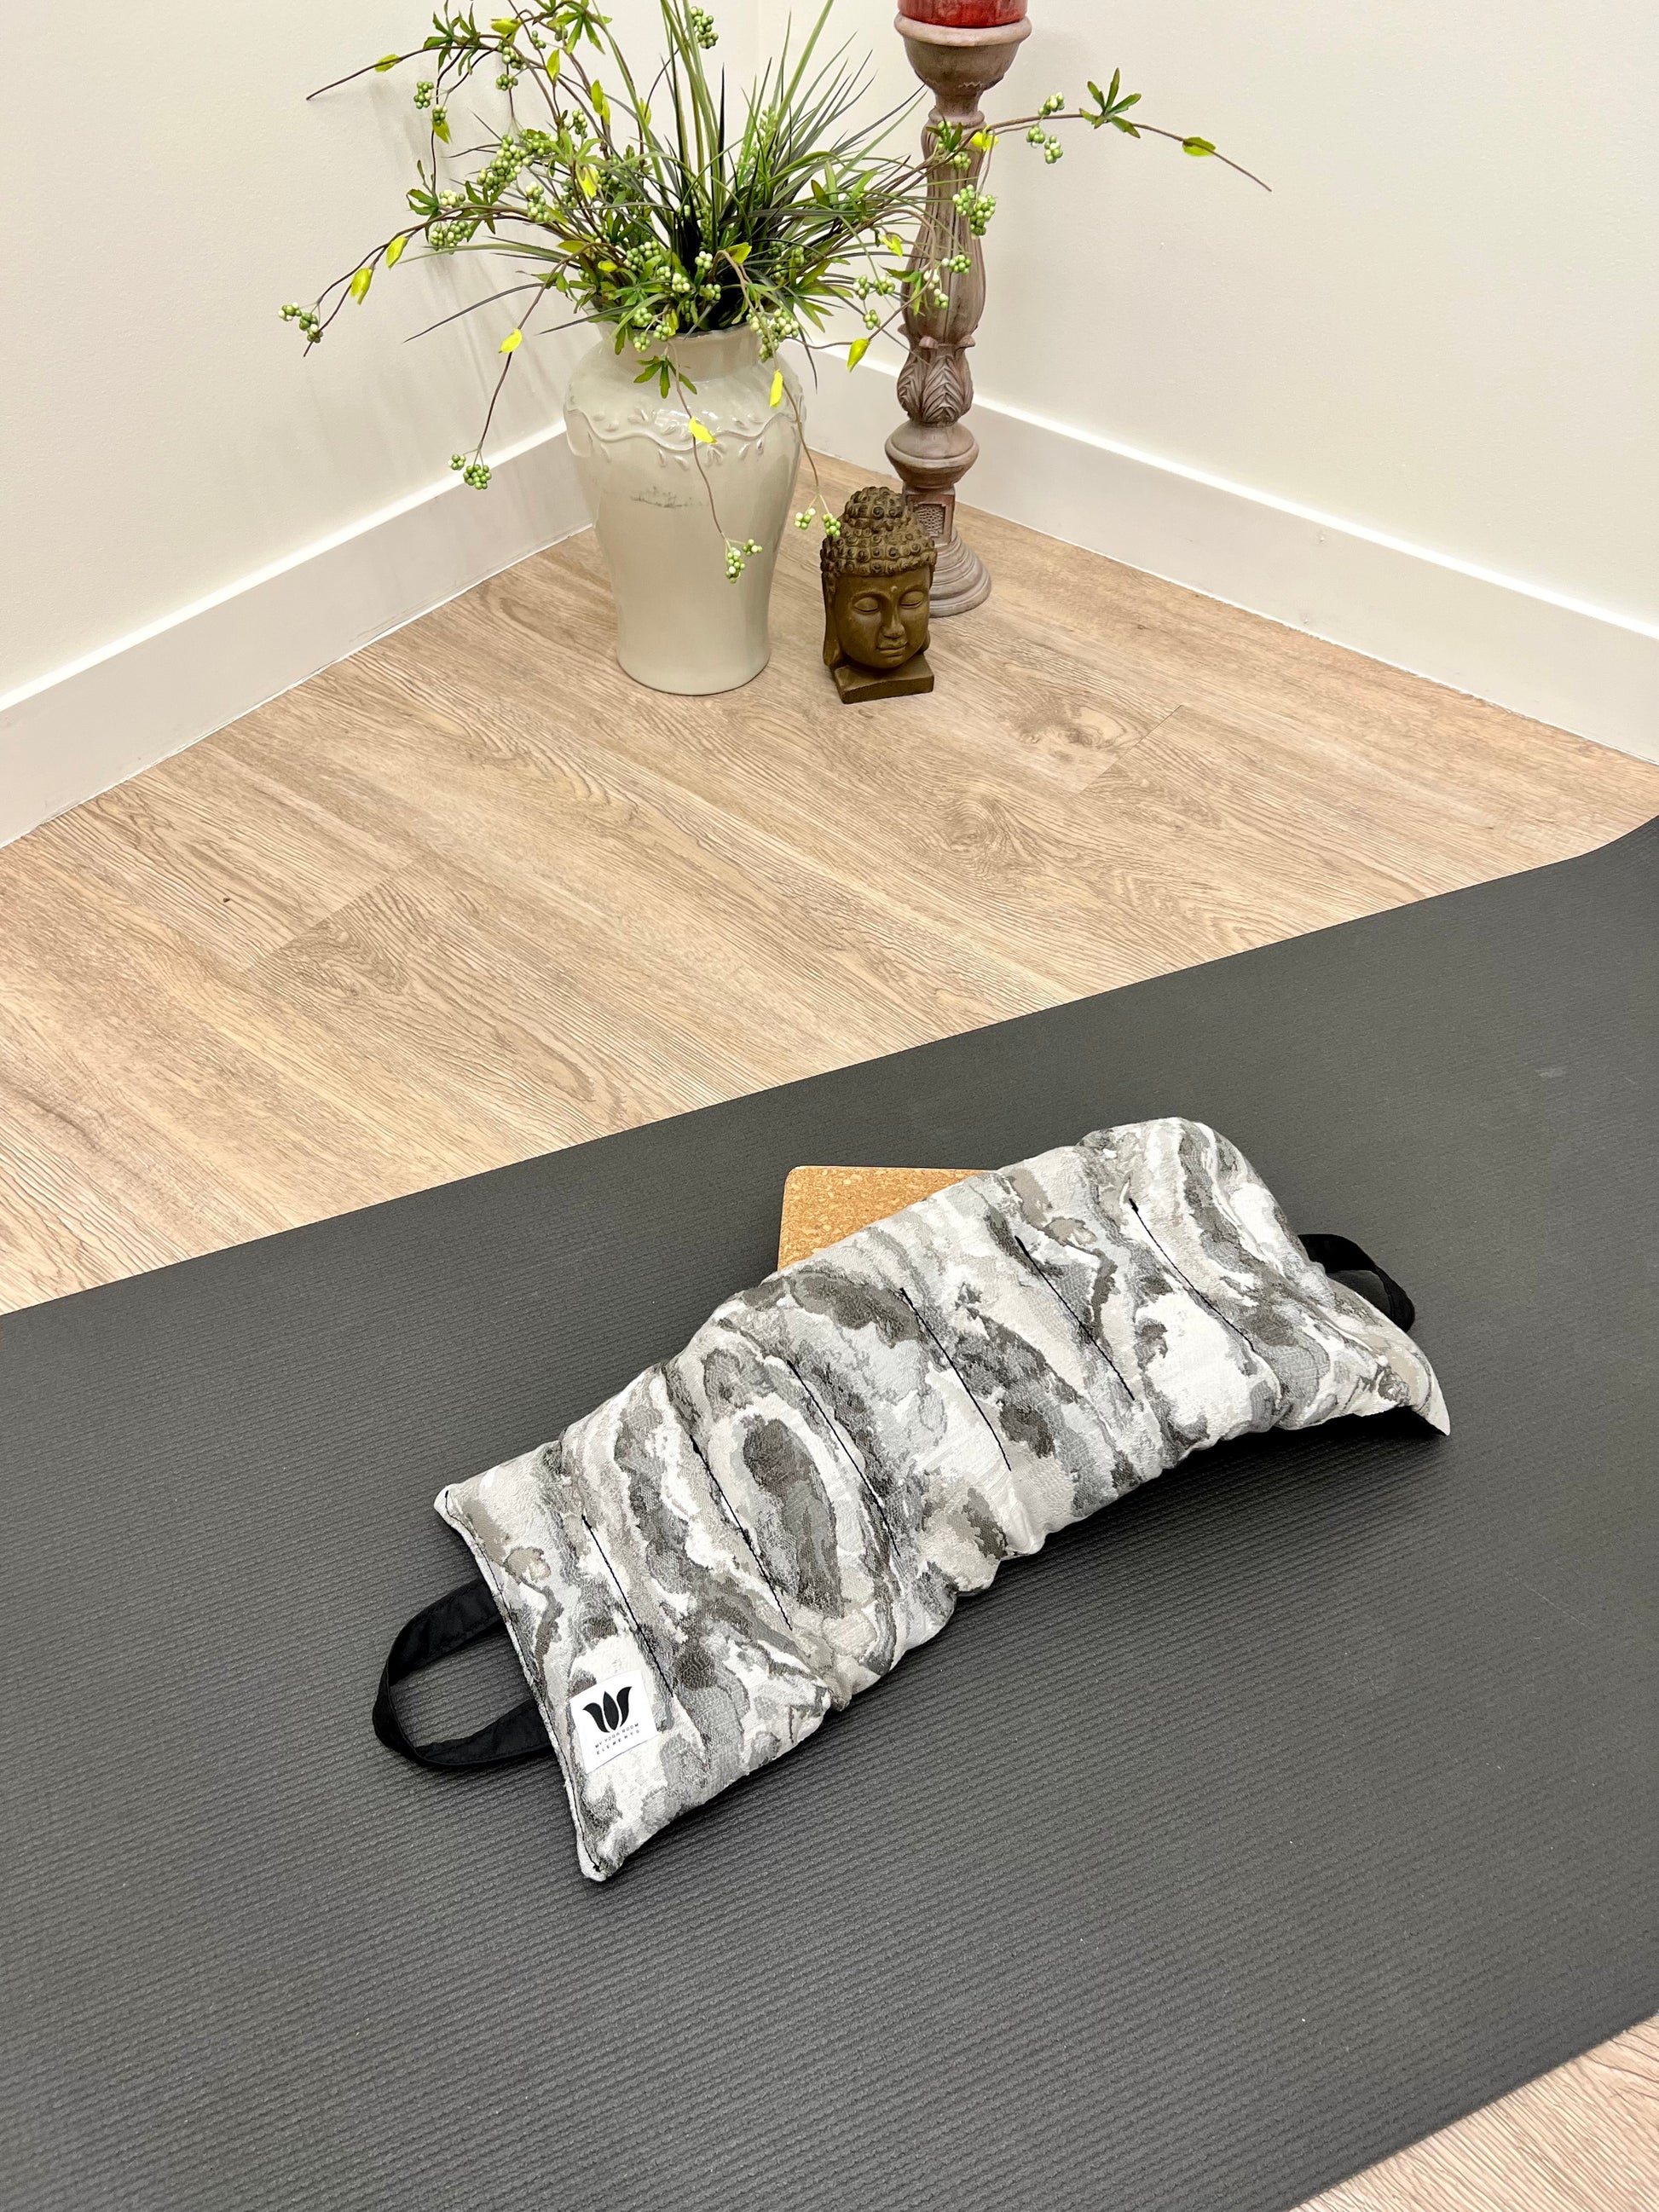 Yoga Sandbag version by My Yoga Room Elements. Add grounding to your practice with this heatable yoga prop. Handcrafted in Calgary in grey marble print fabric.